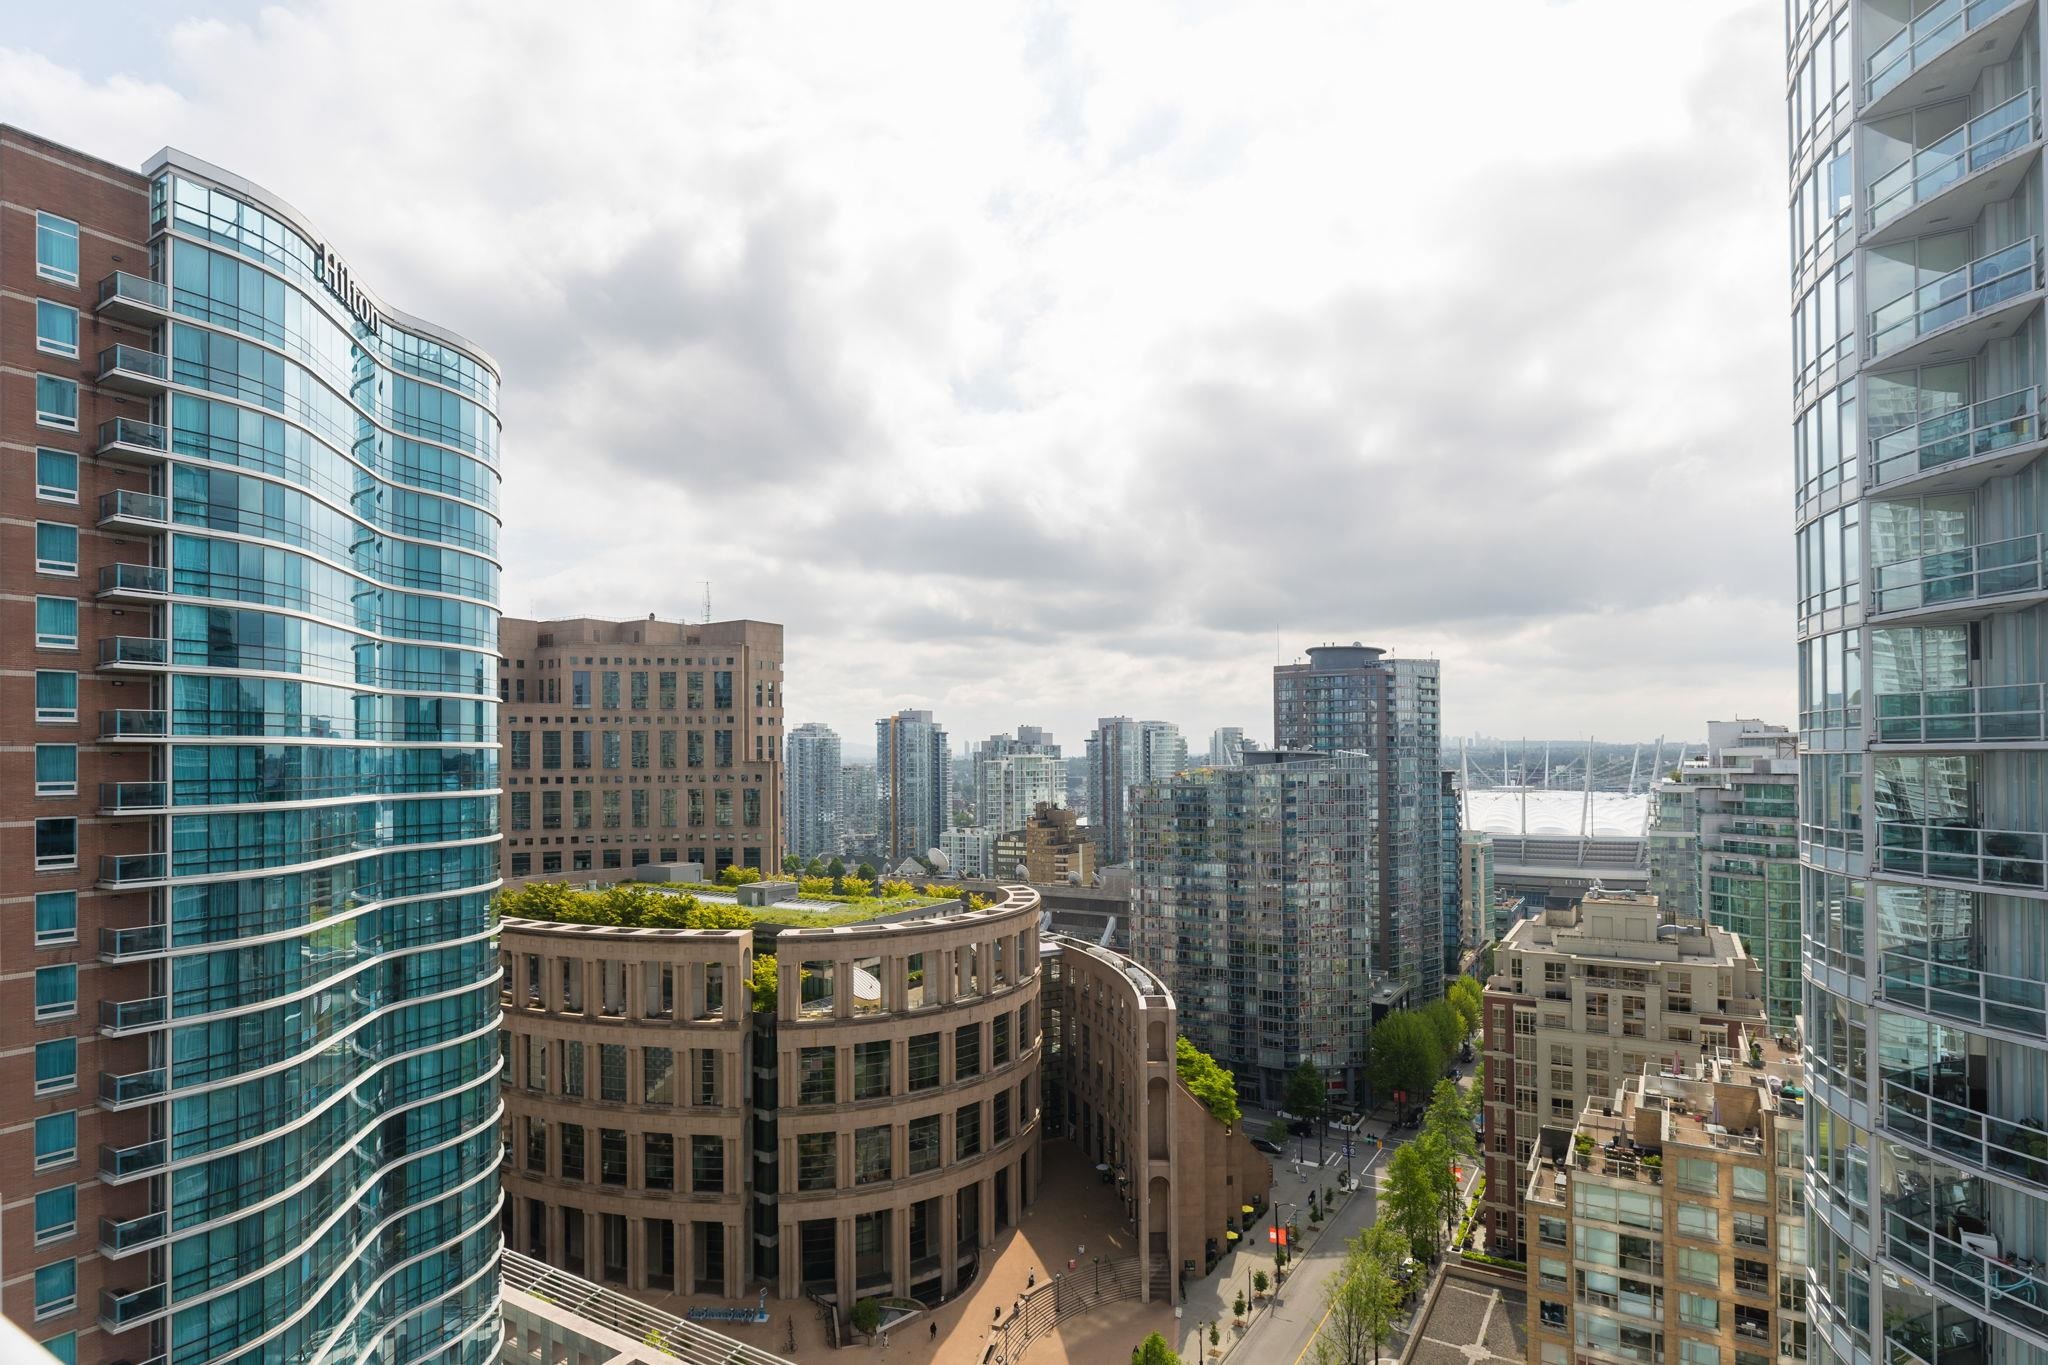 480 Robson Street - R & R, Vancouver MLS® Sold History & For Sale